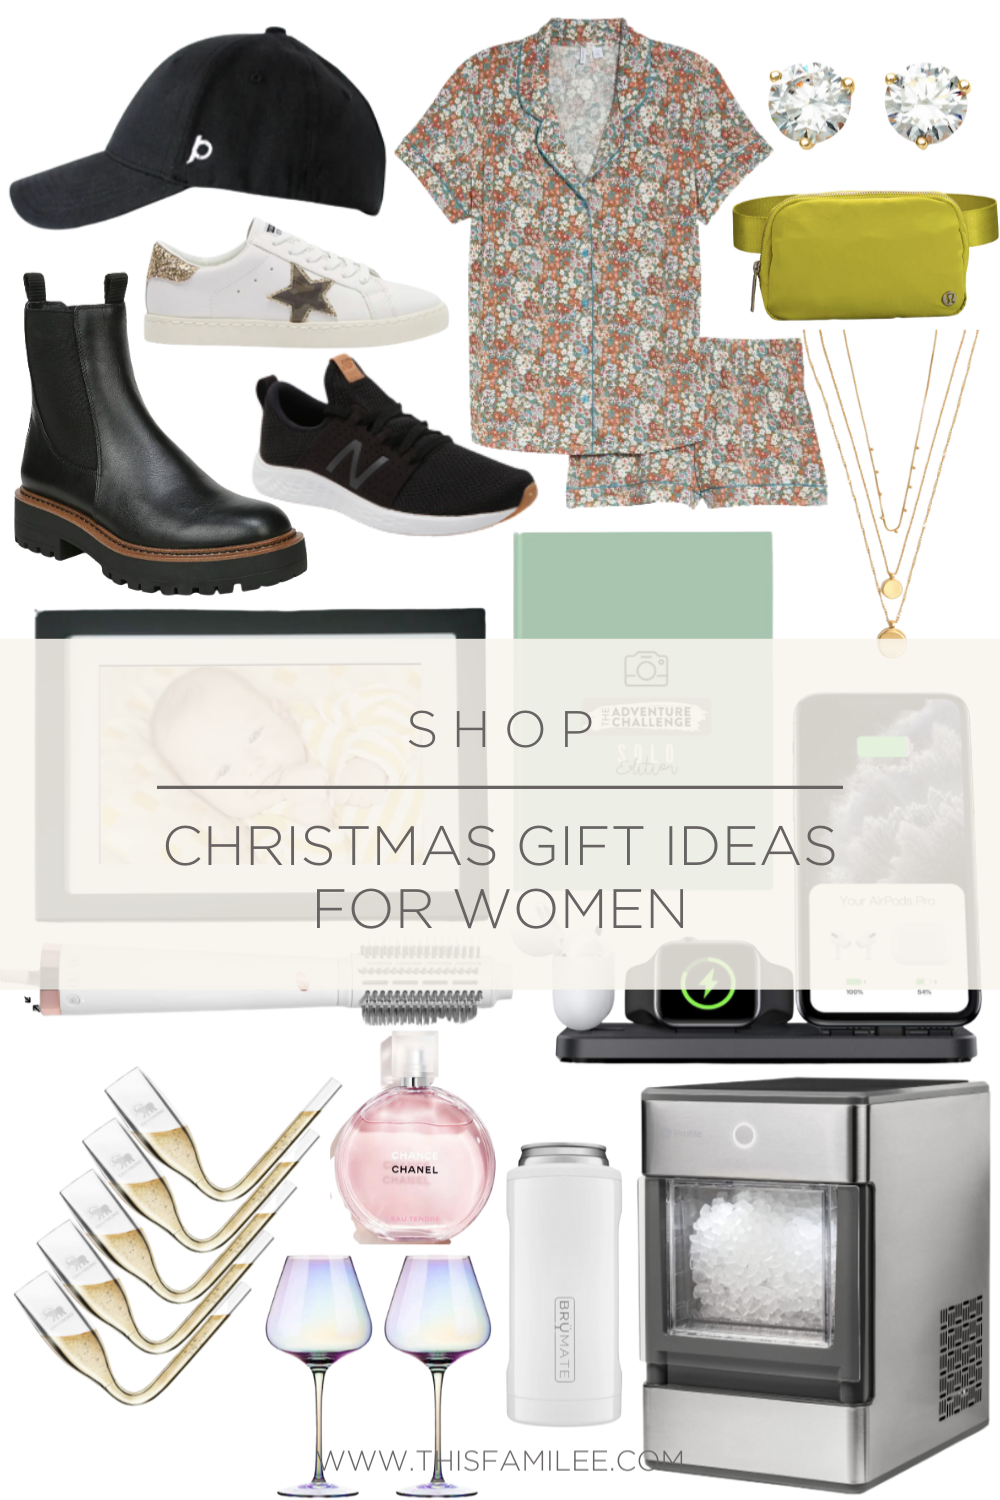 Christmas Gift Ideas for Women | www.thisfamilee.com